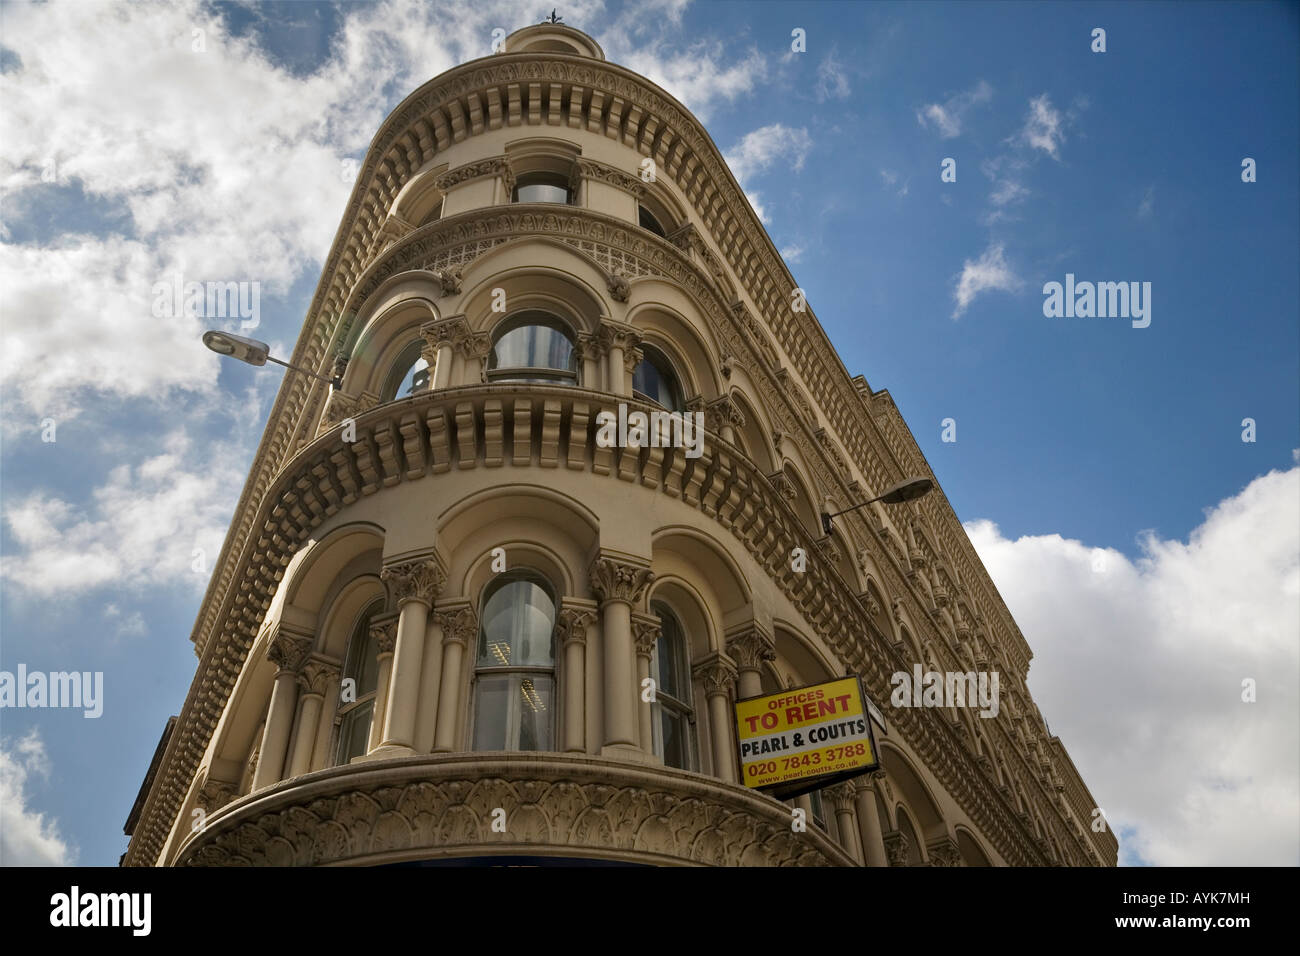 Offices to rent sign hanging off side of building in London Stock Photo